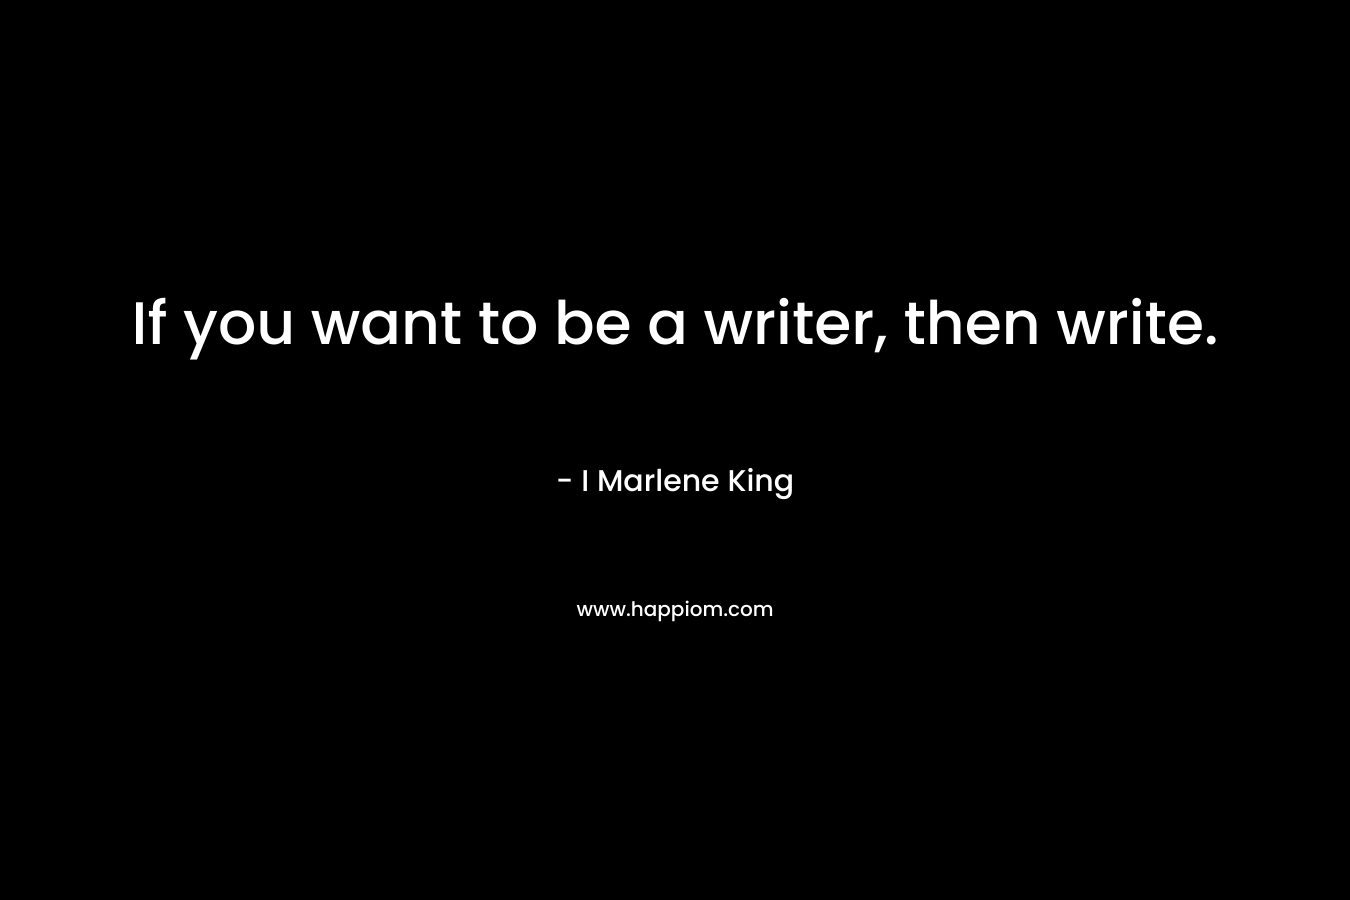 If you want to be a writer, then write.